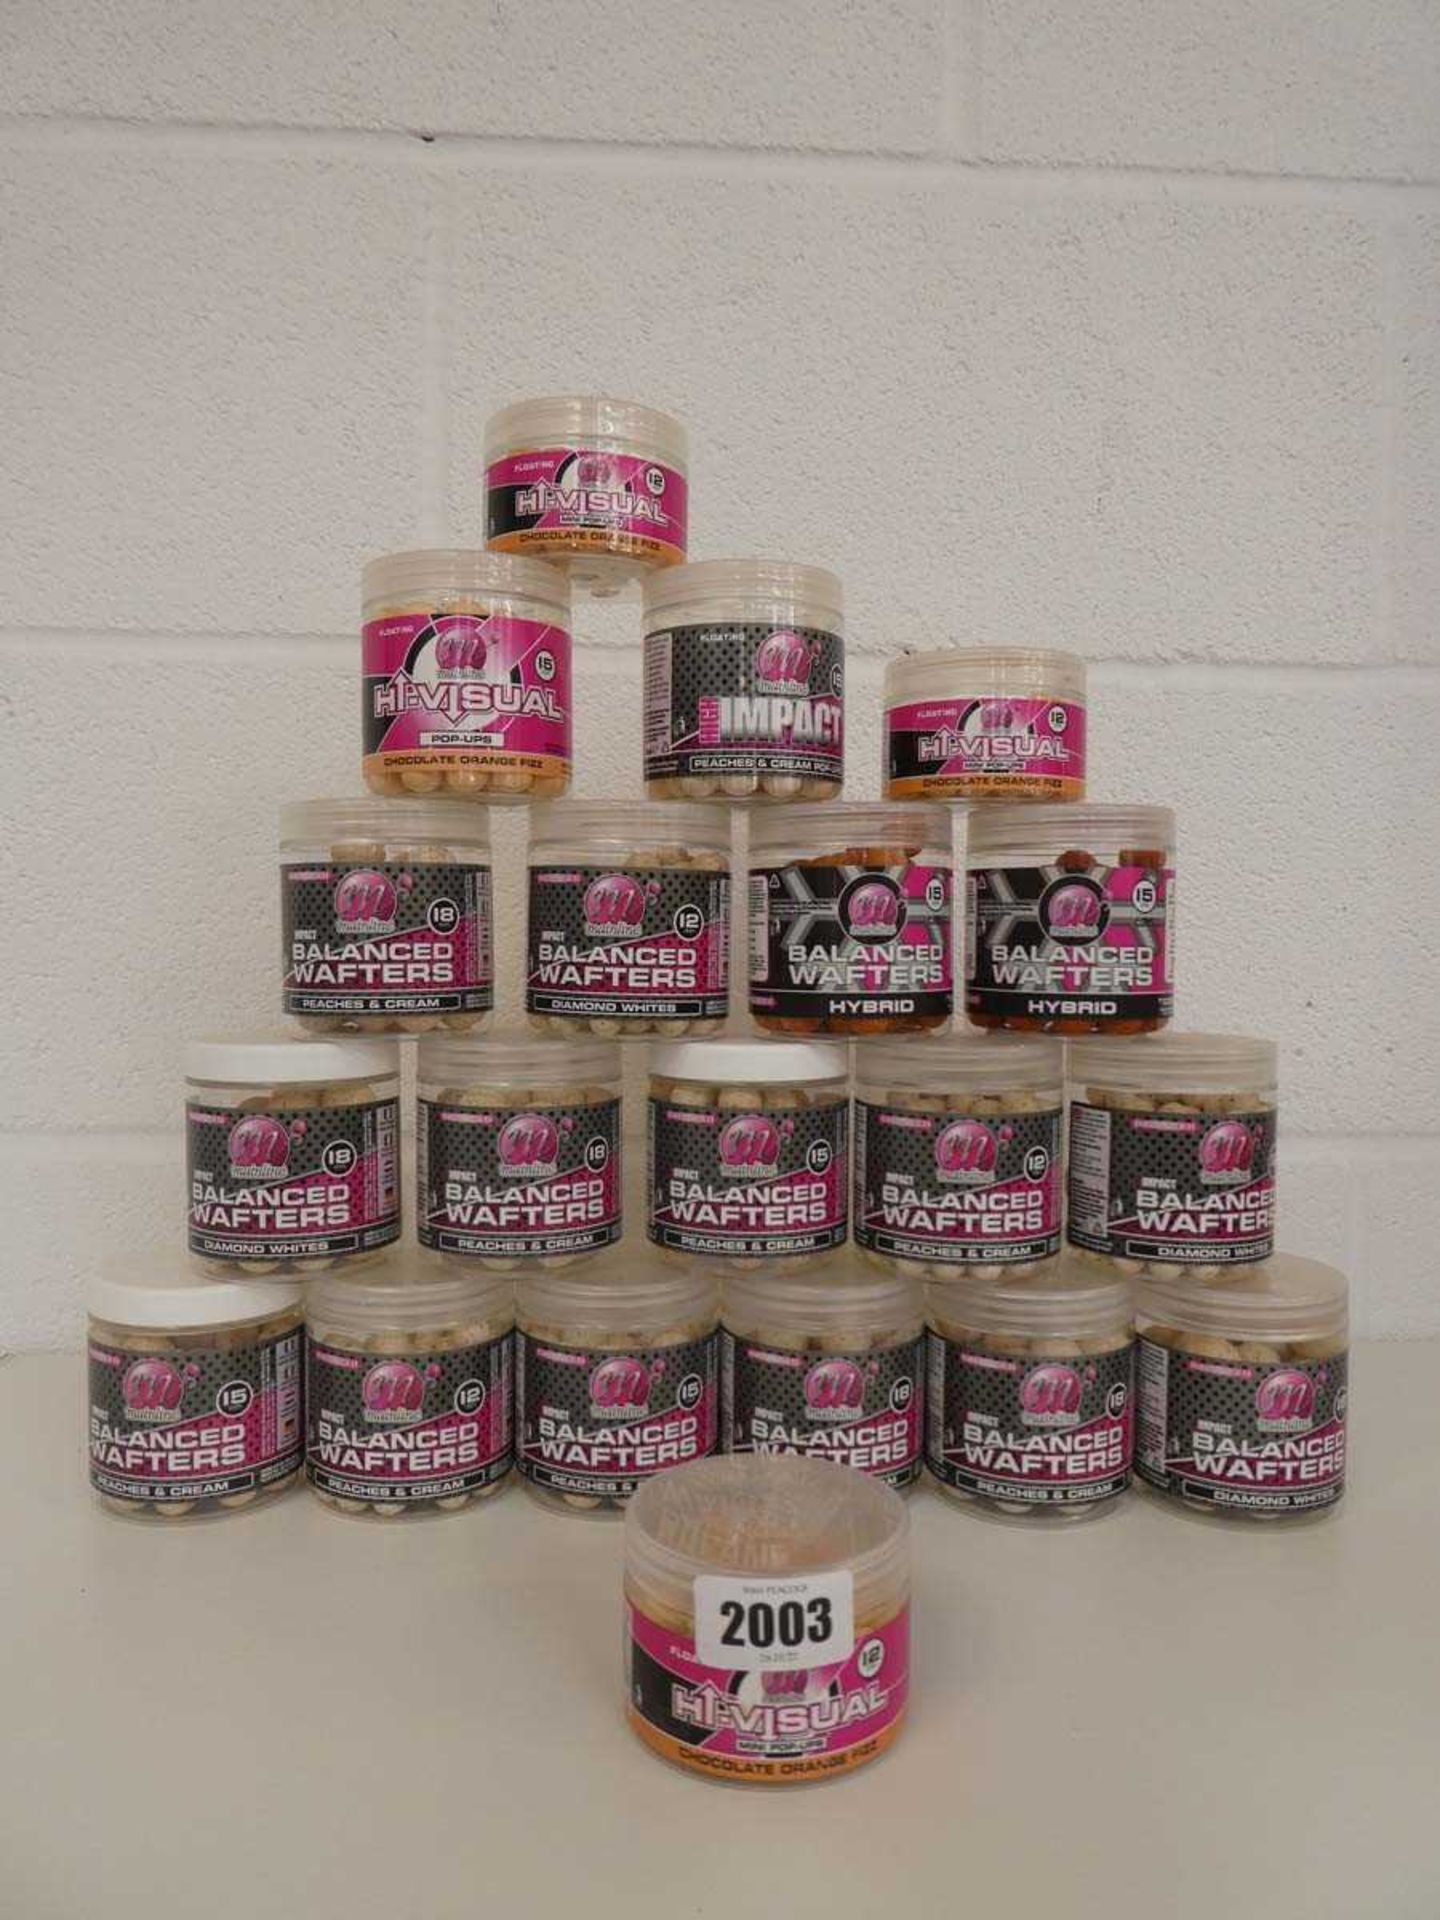 20 tubs of Mainline fishing bait incl. balanced wafters, hi-visual pop-ups, etc. incl. flavours